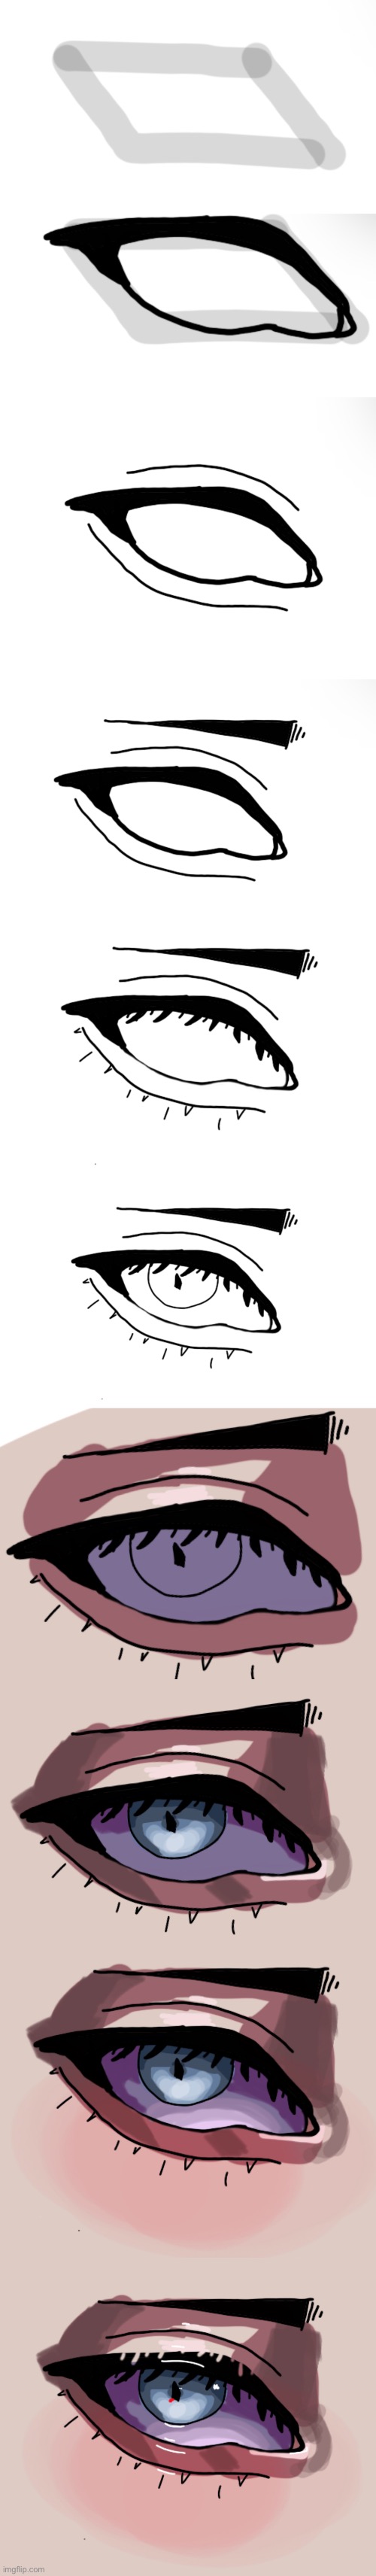 How I usually draw eyes- | image tagged in drawing,art,eyes | made w/ Imgflip meme maker